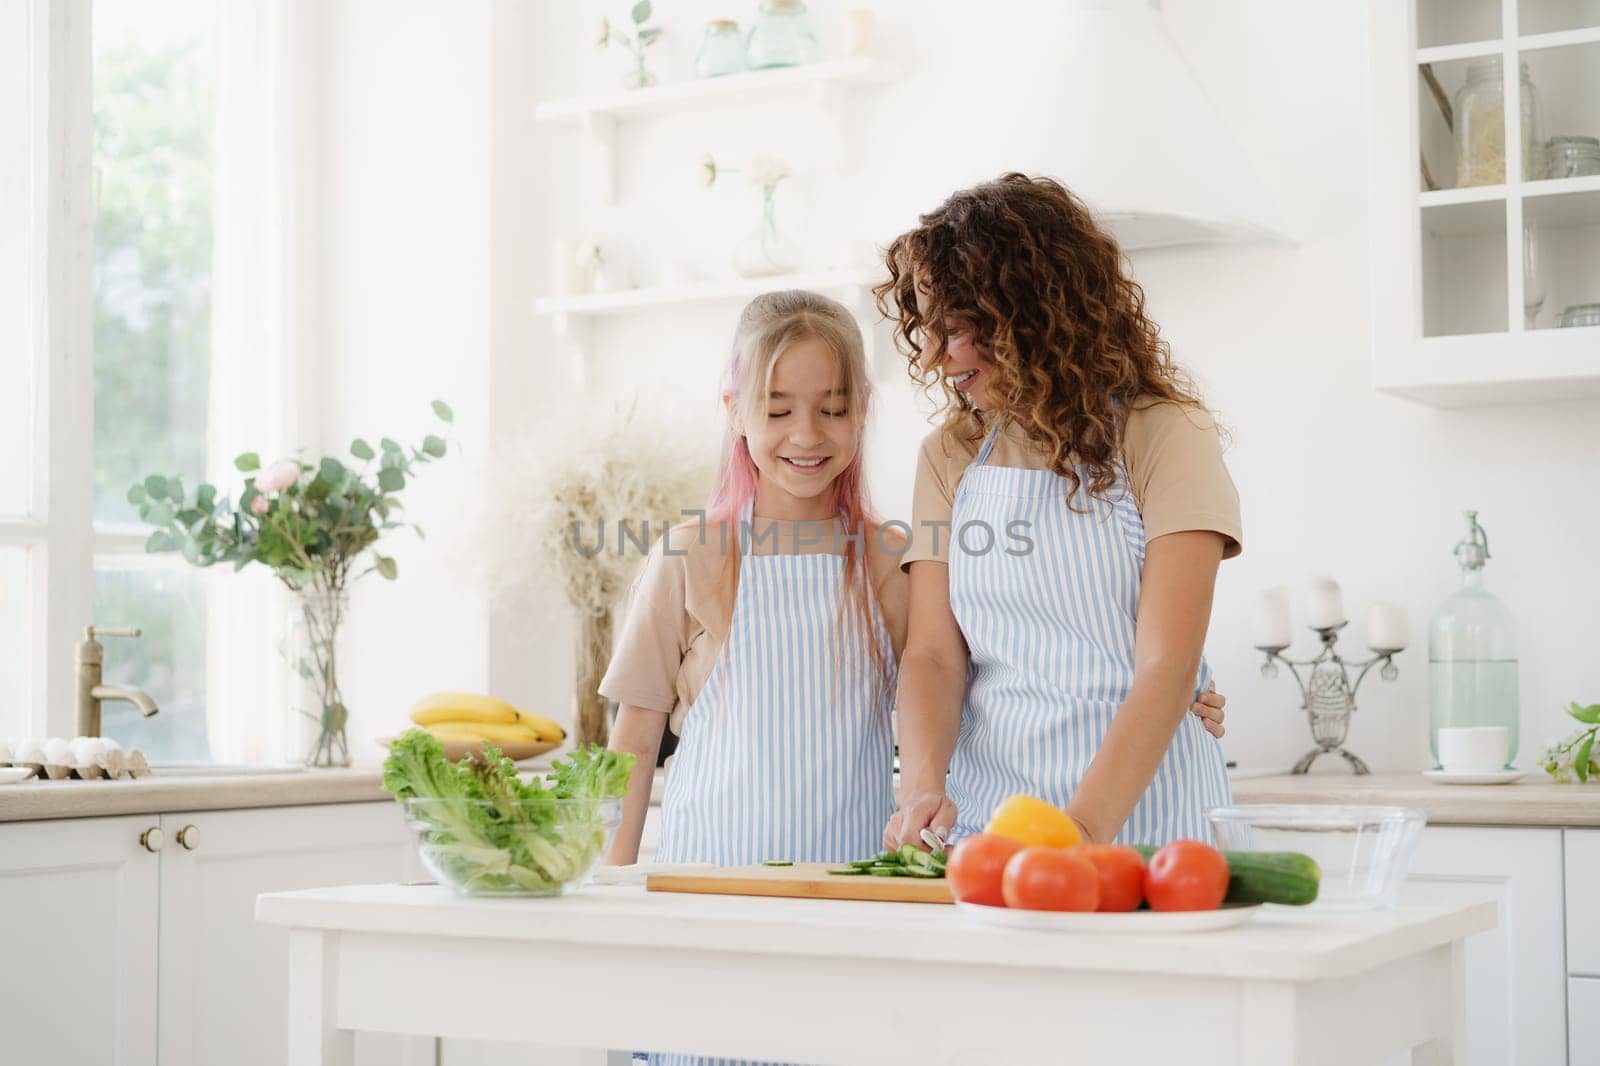 Mother and teen daughter preparing vegetable salad at kitchen, close up